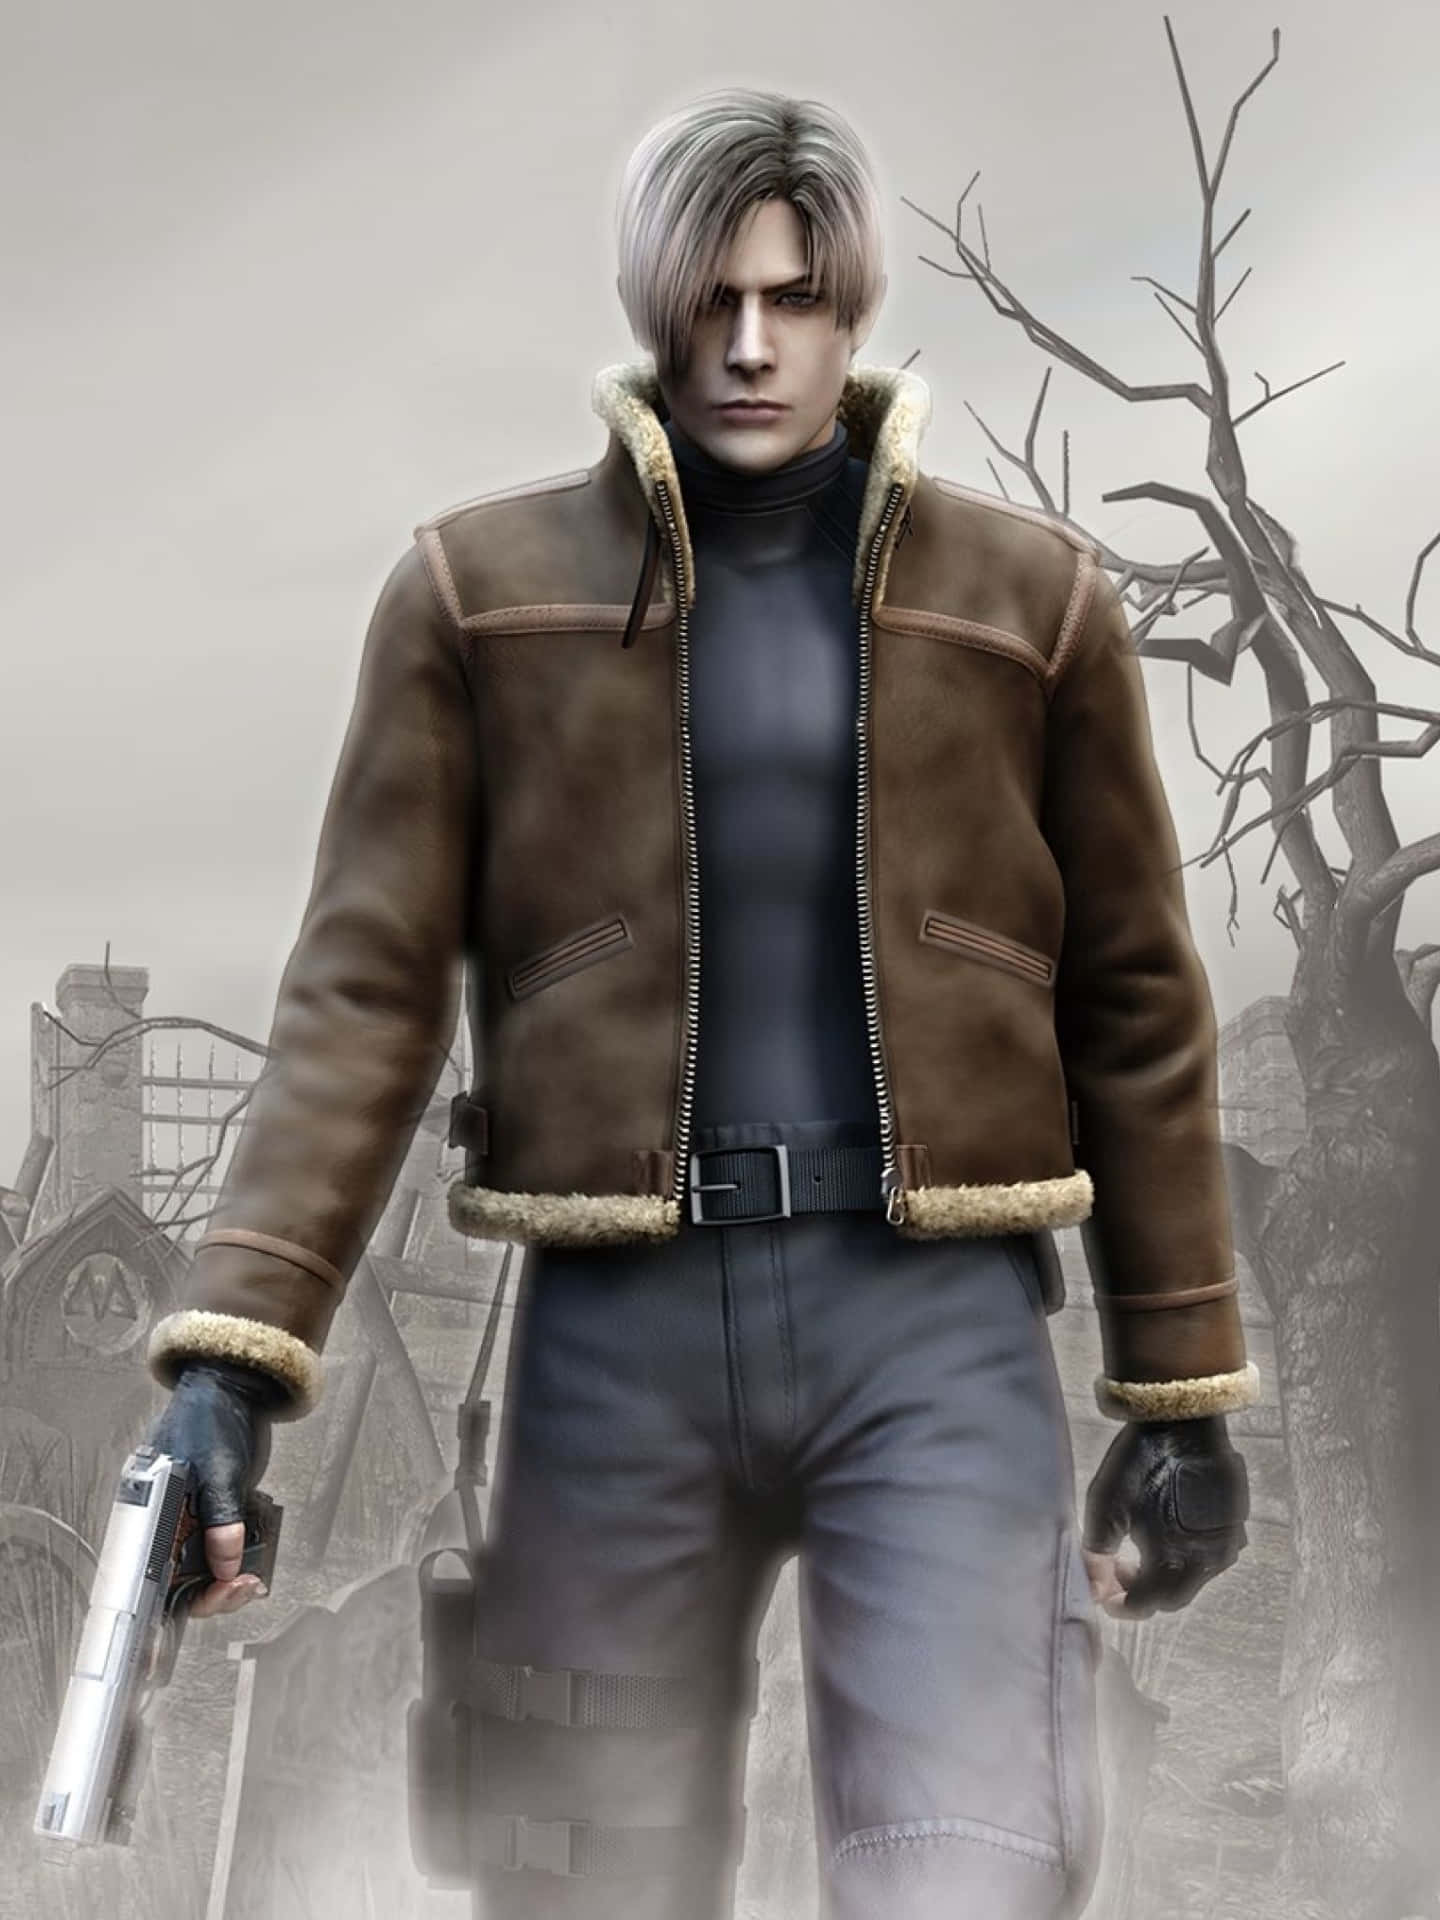 Experience a new kind of horror with Resident Evil 2 Wallpaper